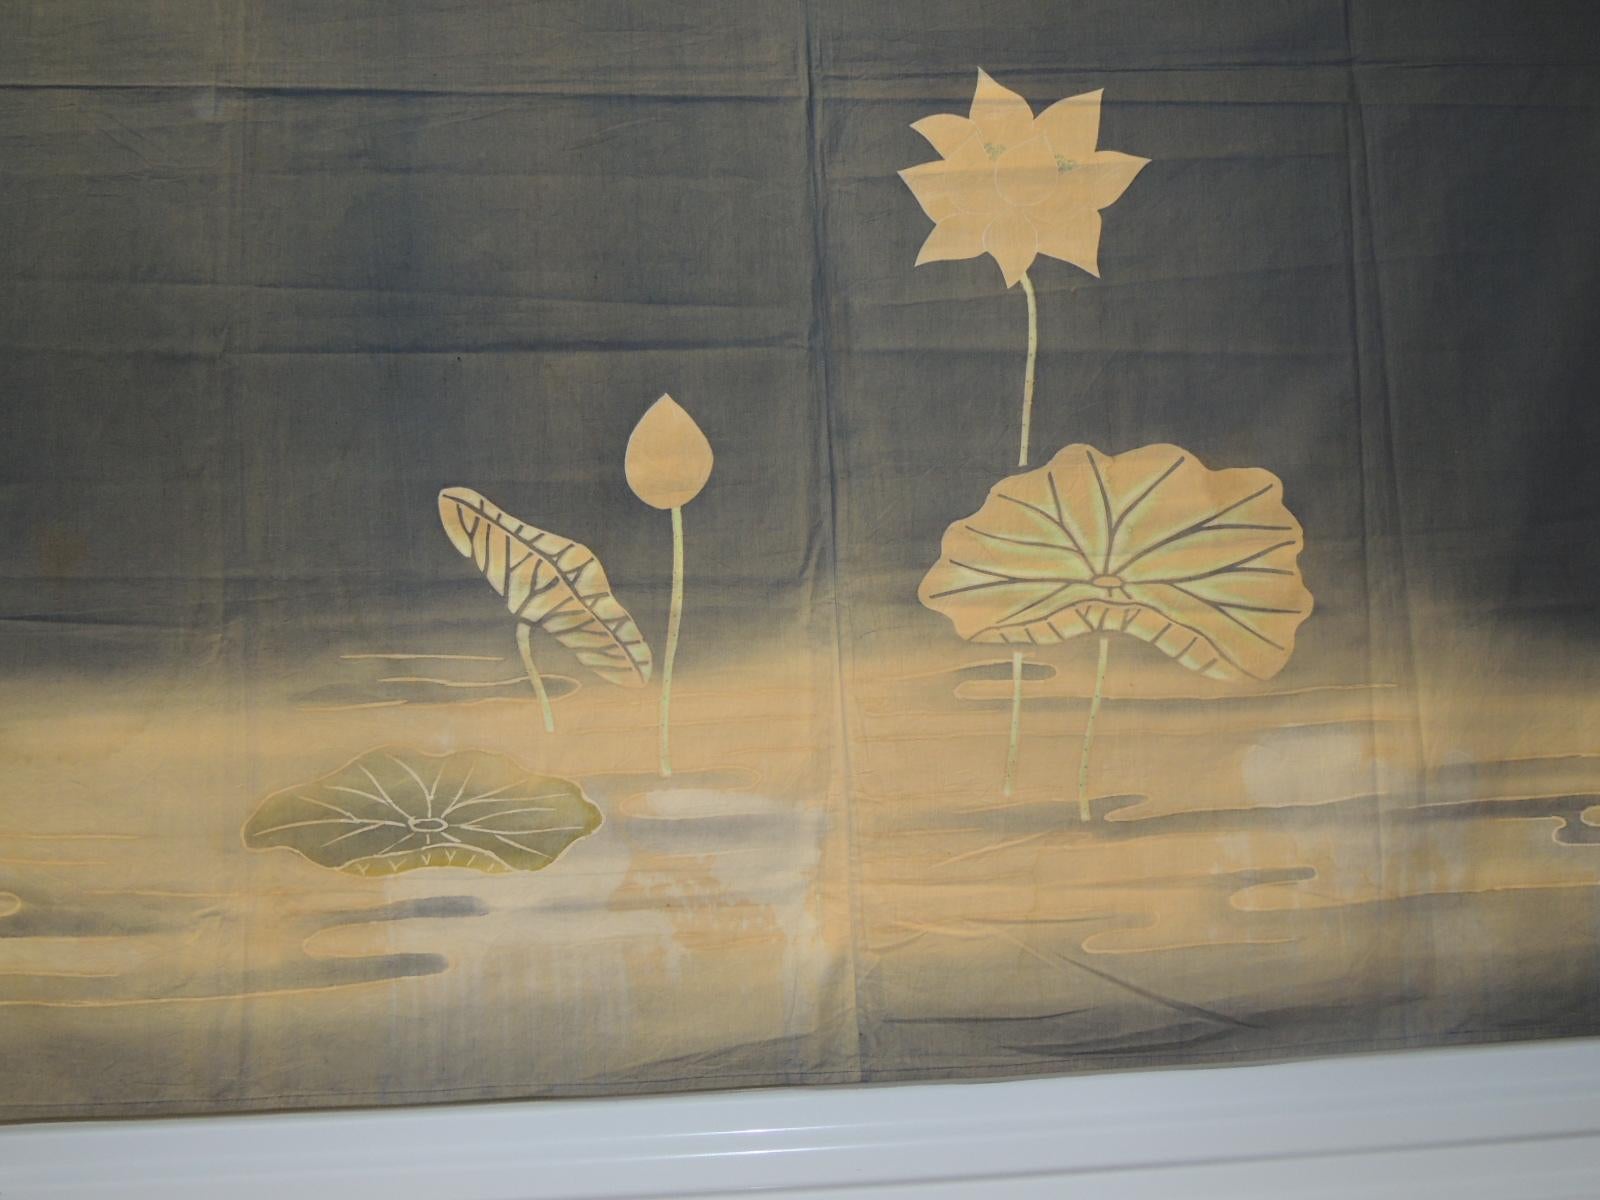 Antique Textile Collection:
Vintage Japanese Printed Cotton Banner. Two panels attached in the center.
Depicting hand painted clouds and lotus flowers.
Size: 65H x 72W